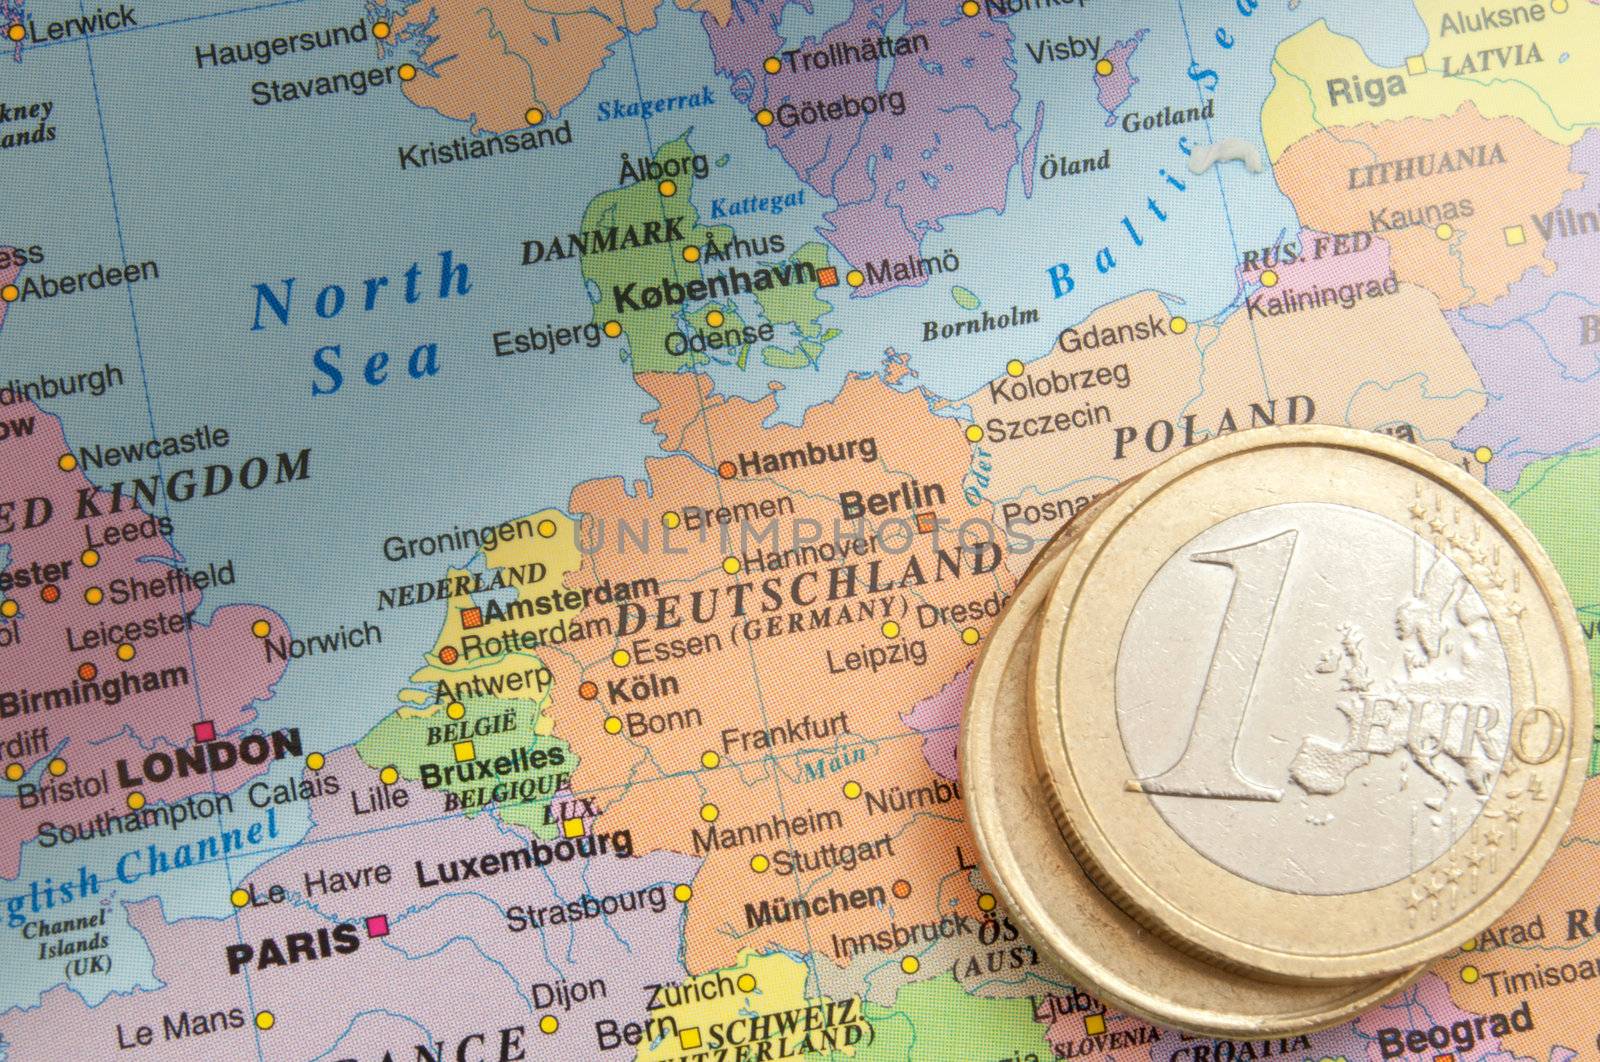 Euro coins on a map of Germany and Europe